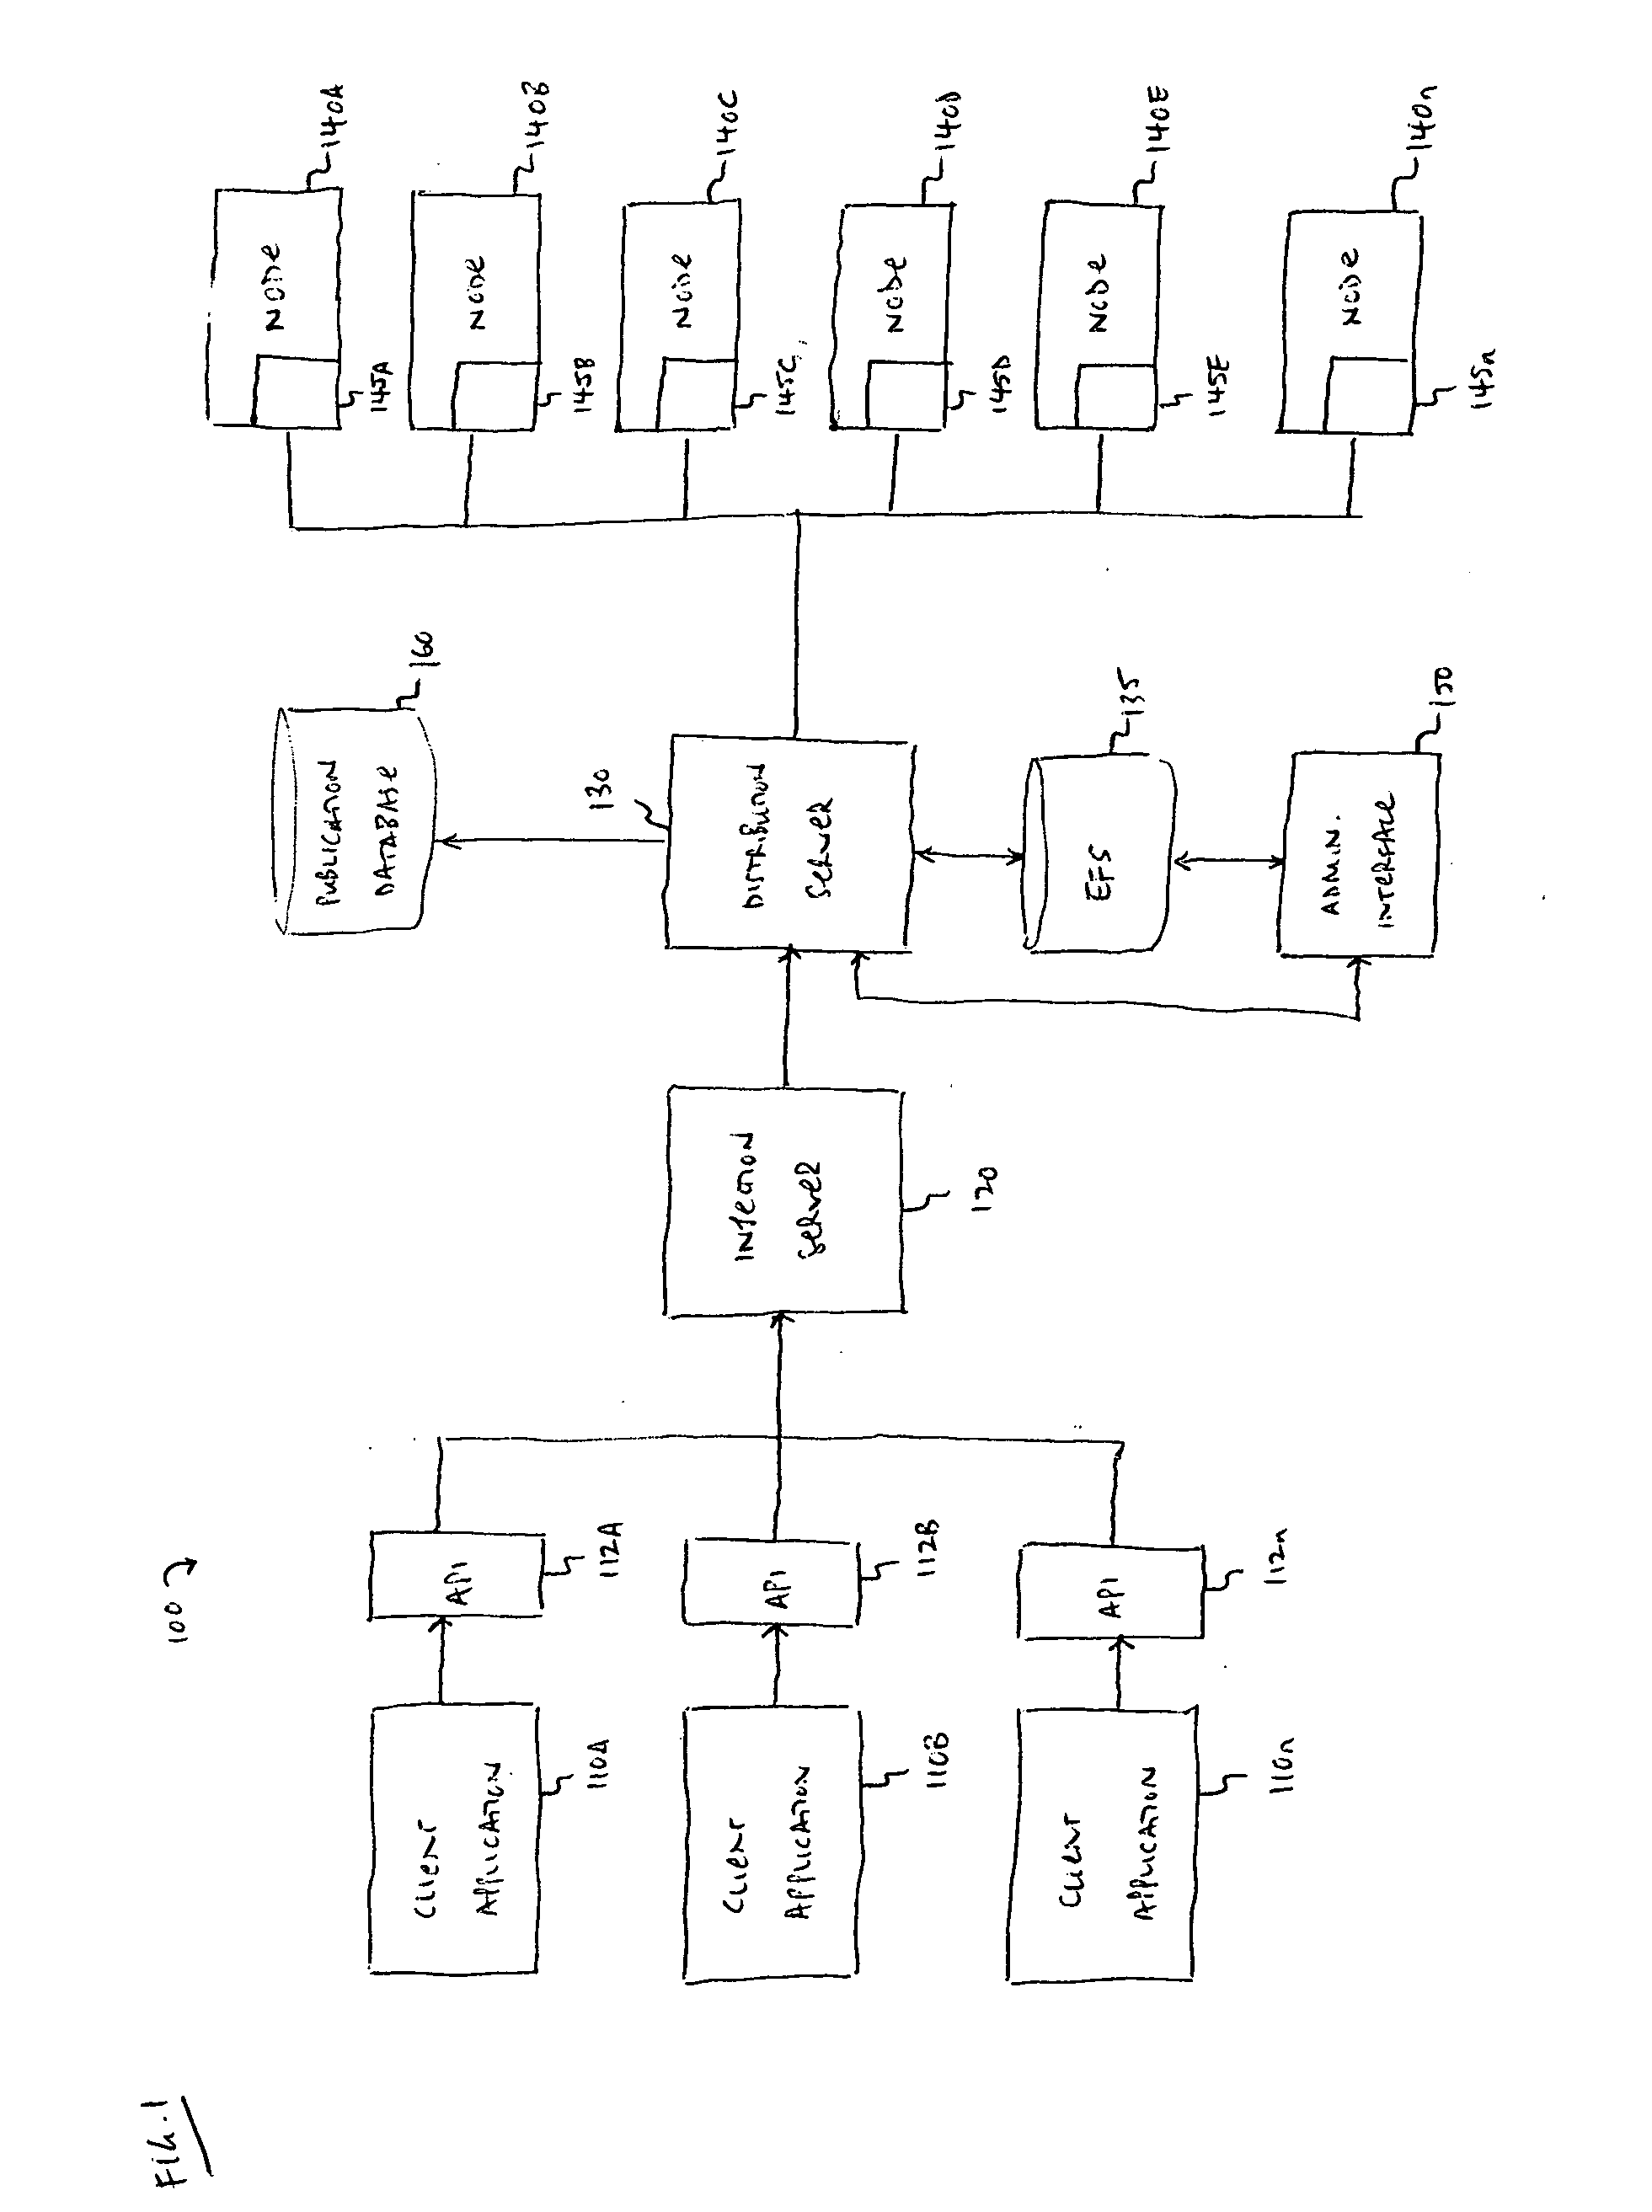 Method and apparatus for processing of heterogeneous units of work